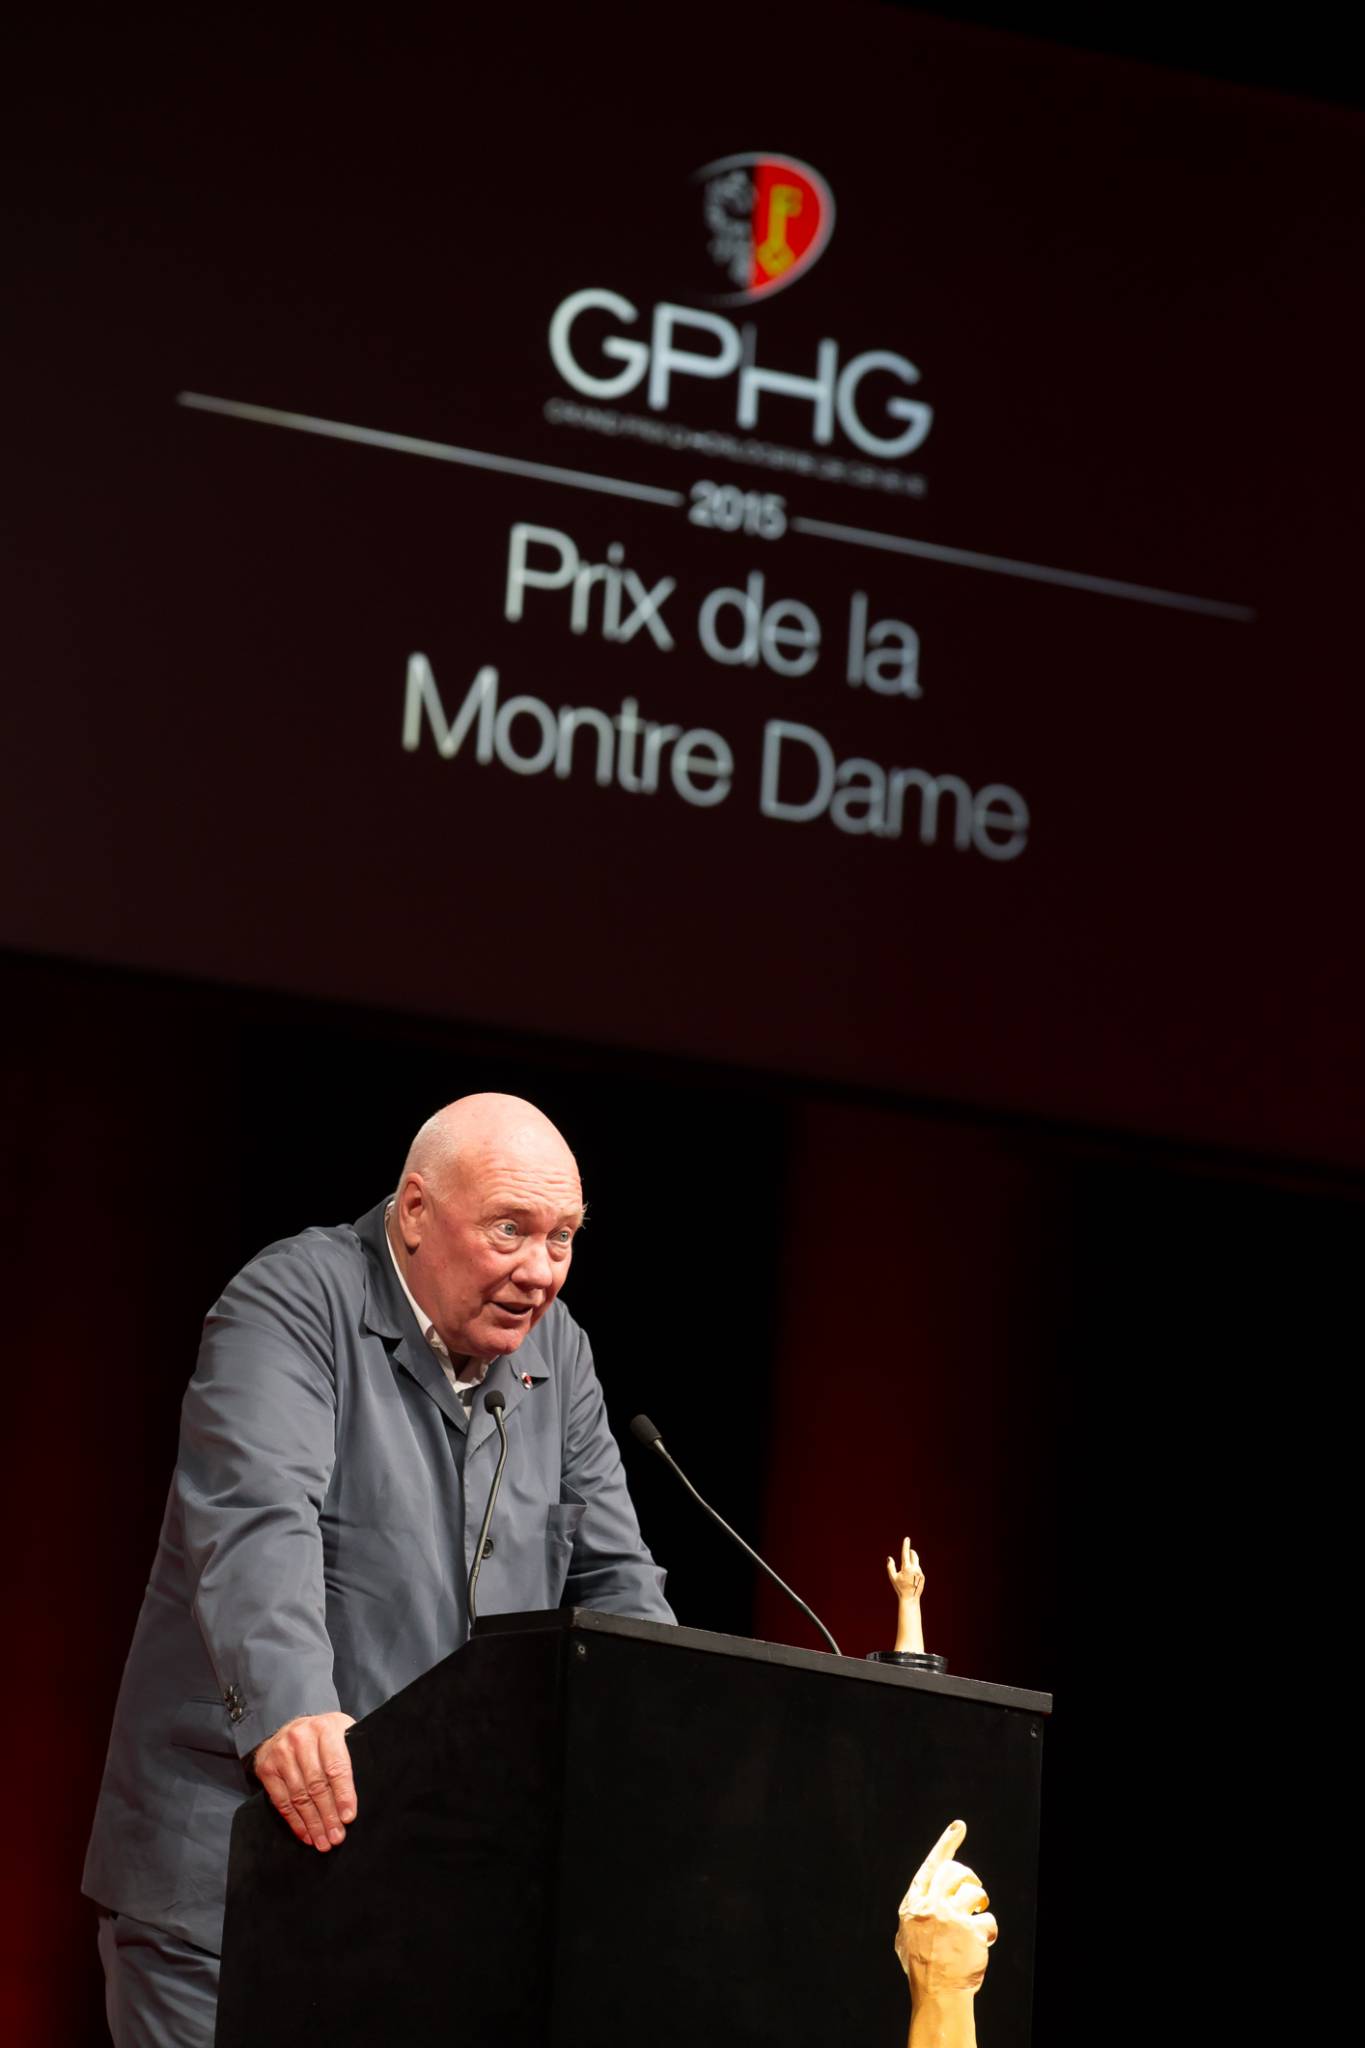 Jean-Claude Biver (President of the Watch Division of the LVMH Group and Chairman of Hublot, winner of the Ladies’ Watch Prize 2015)